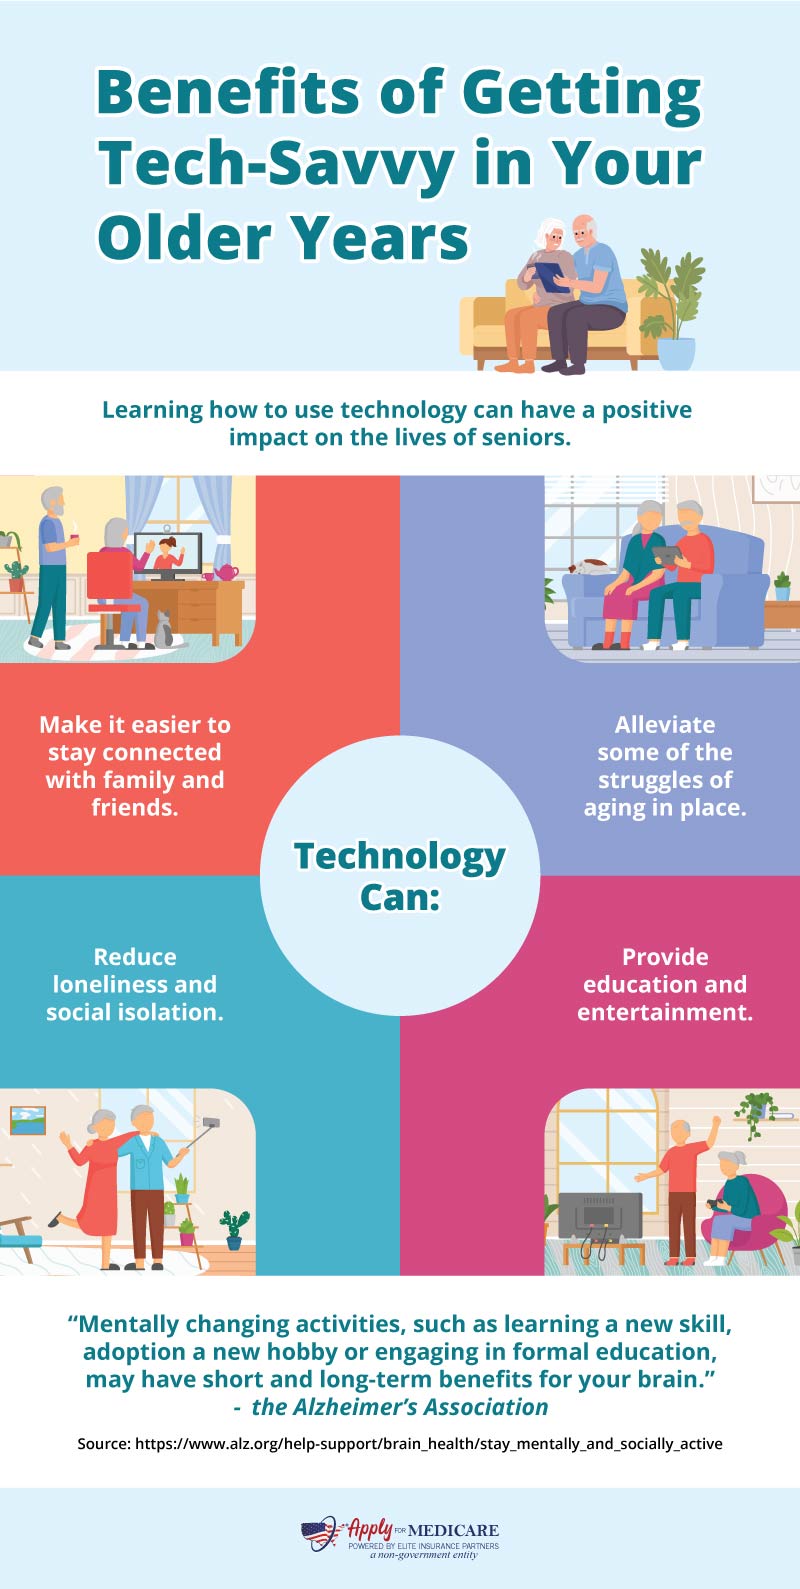 Four Benefits of Getting Tech Savvy in Your Older Years and How it Can Impact the Lives of Seniors